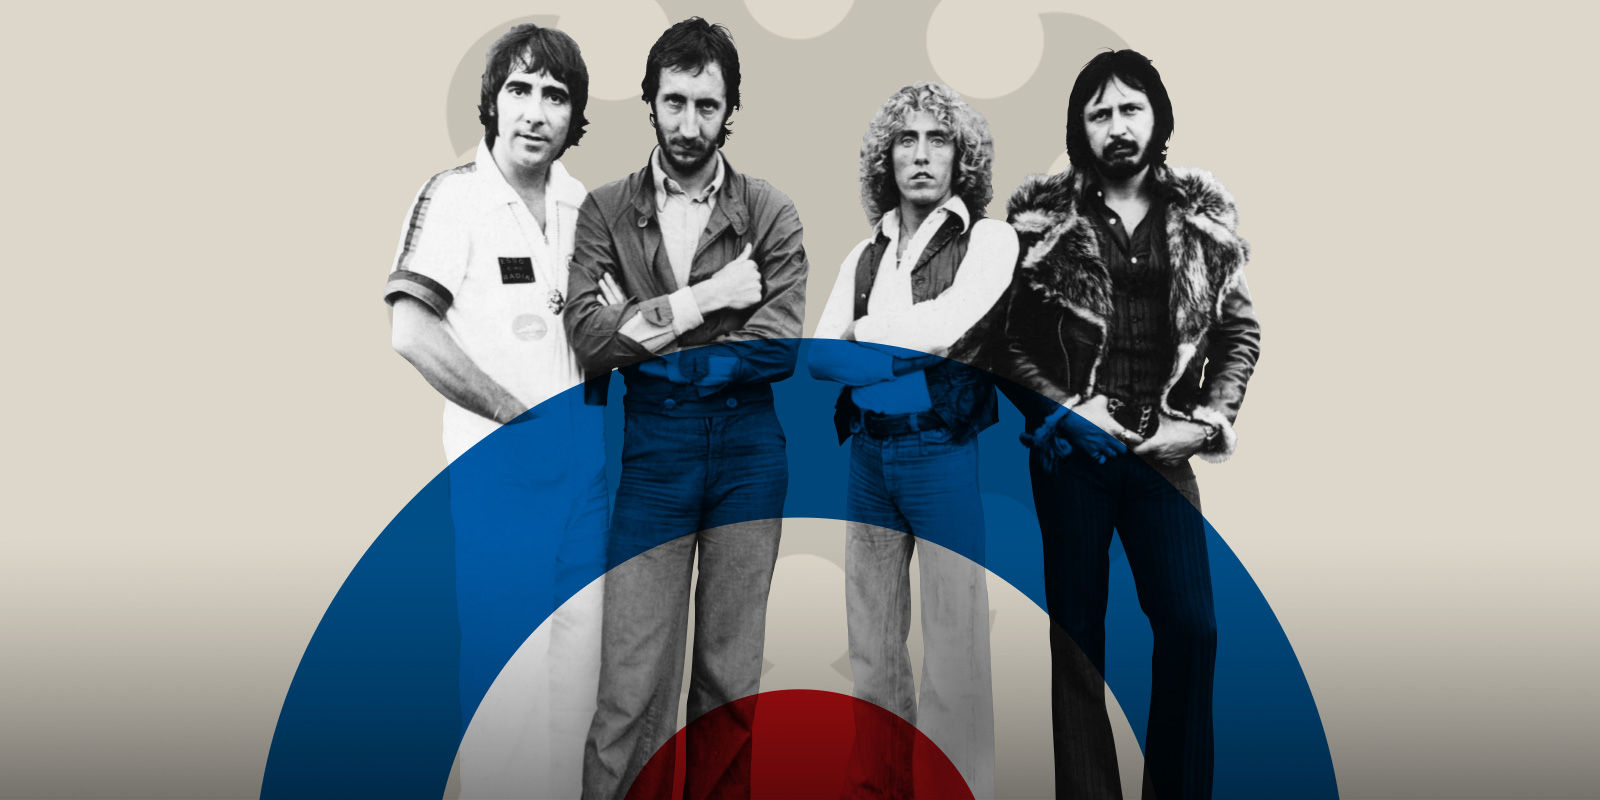 The Biggest Fan - The Who